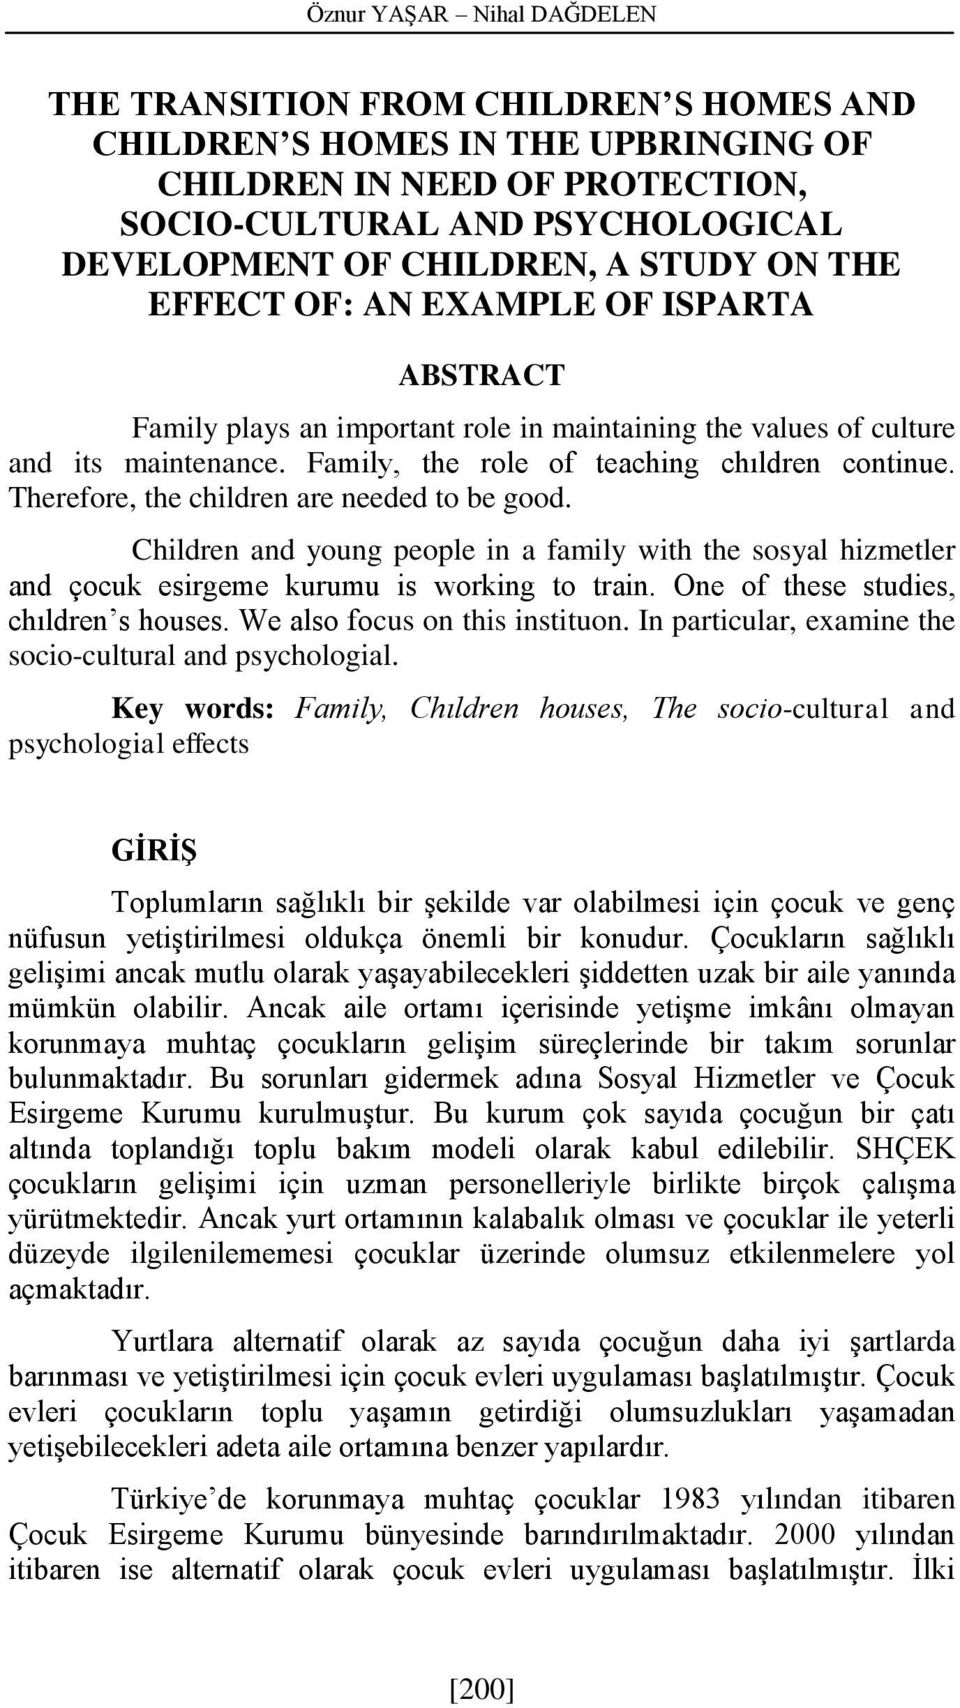 Therefore, the children are needed to be good. Children and young people in a family with the sosyal hizmetler and çocuk esirgeme kurumu is working to train. One of these studies, chıldren s houses.